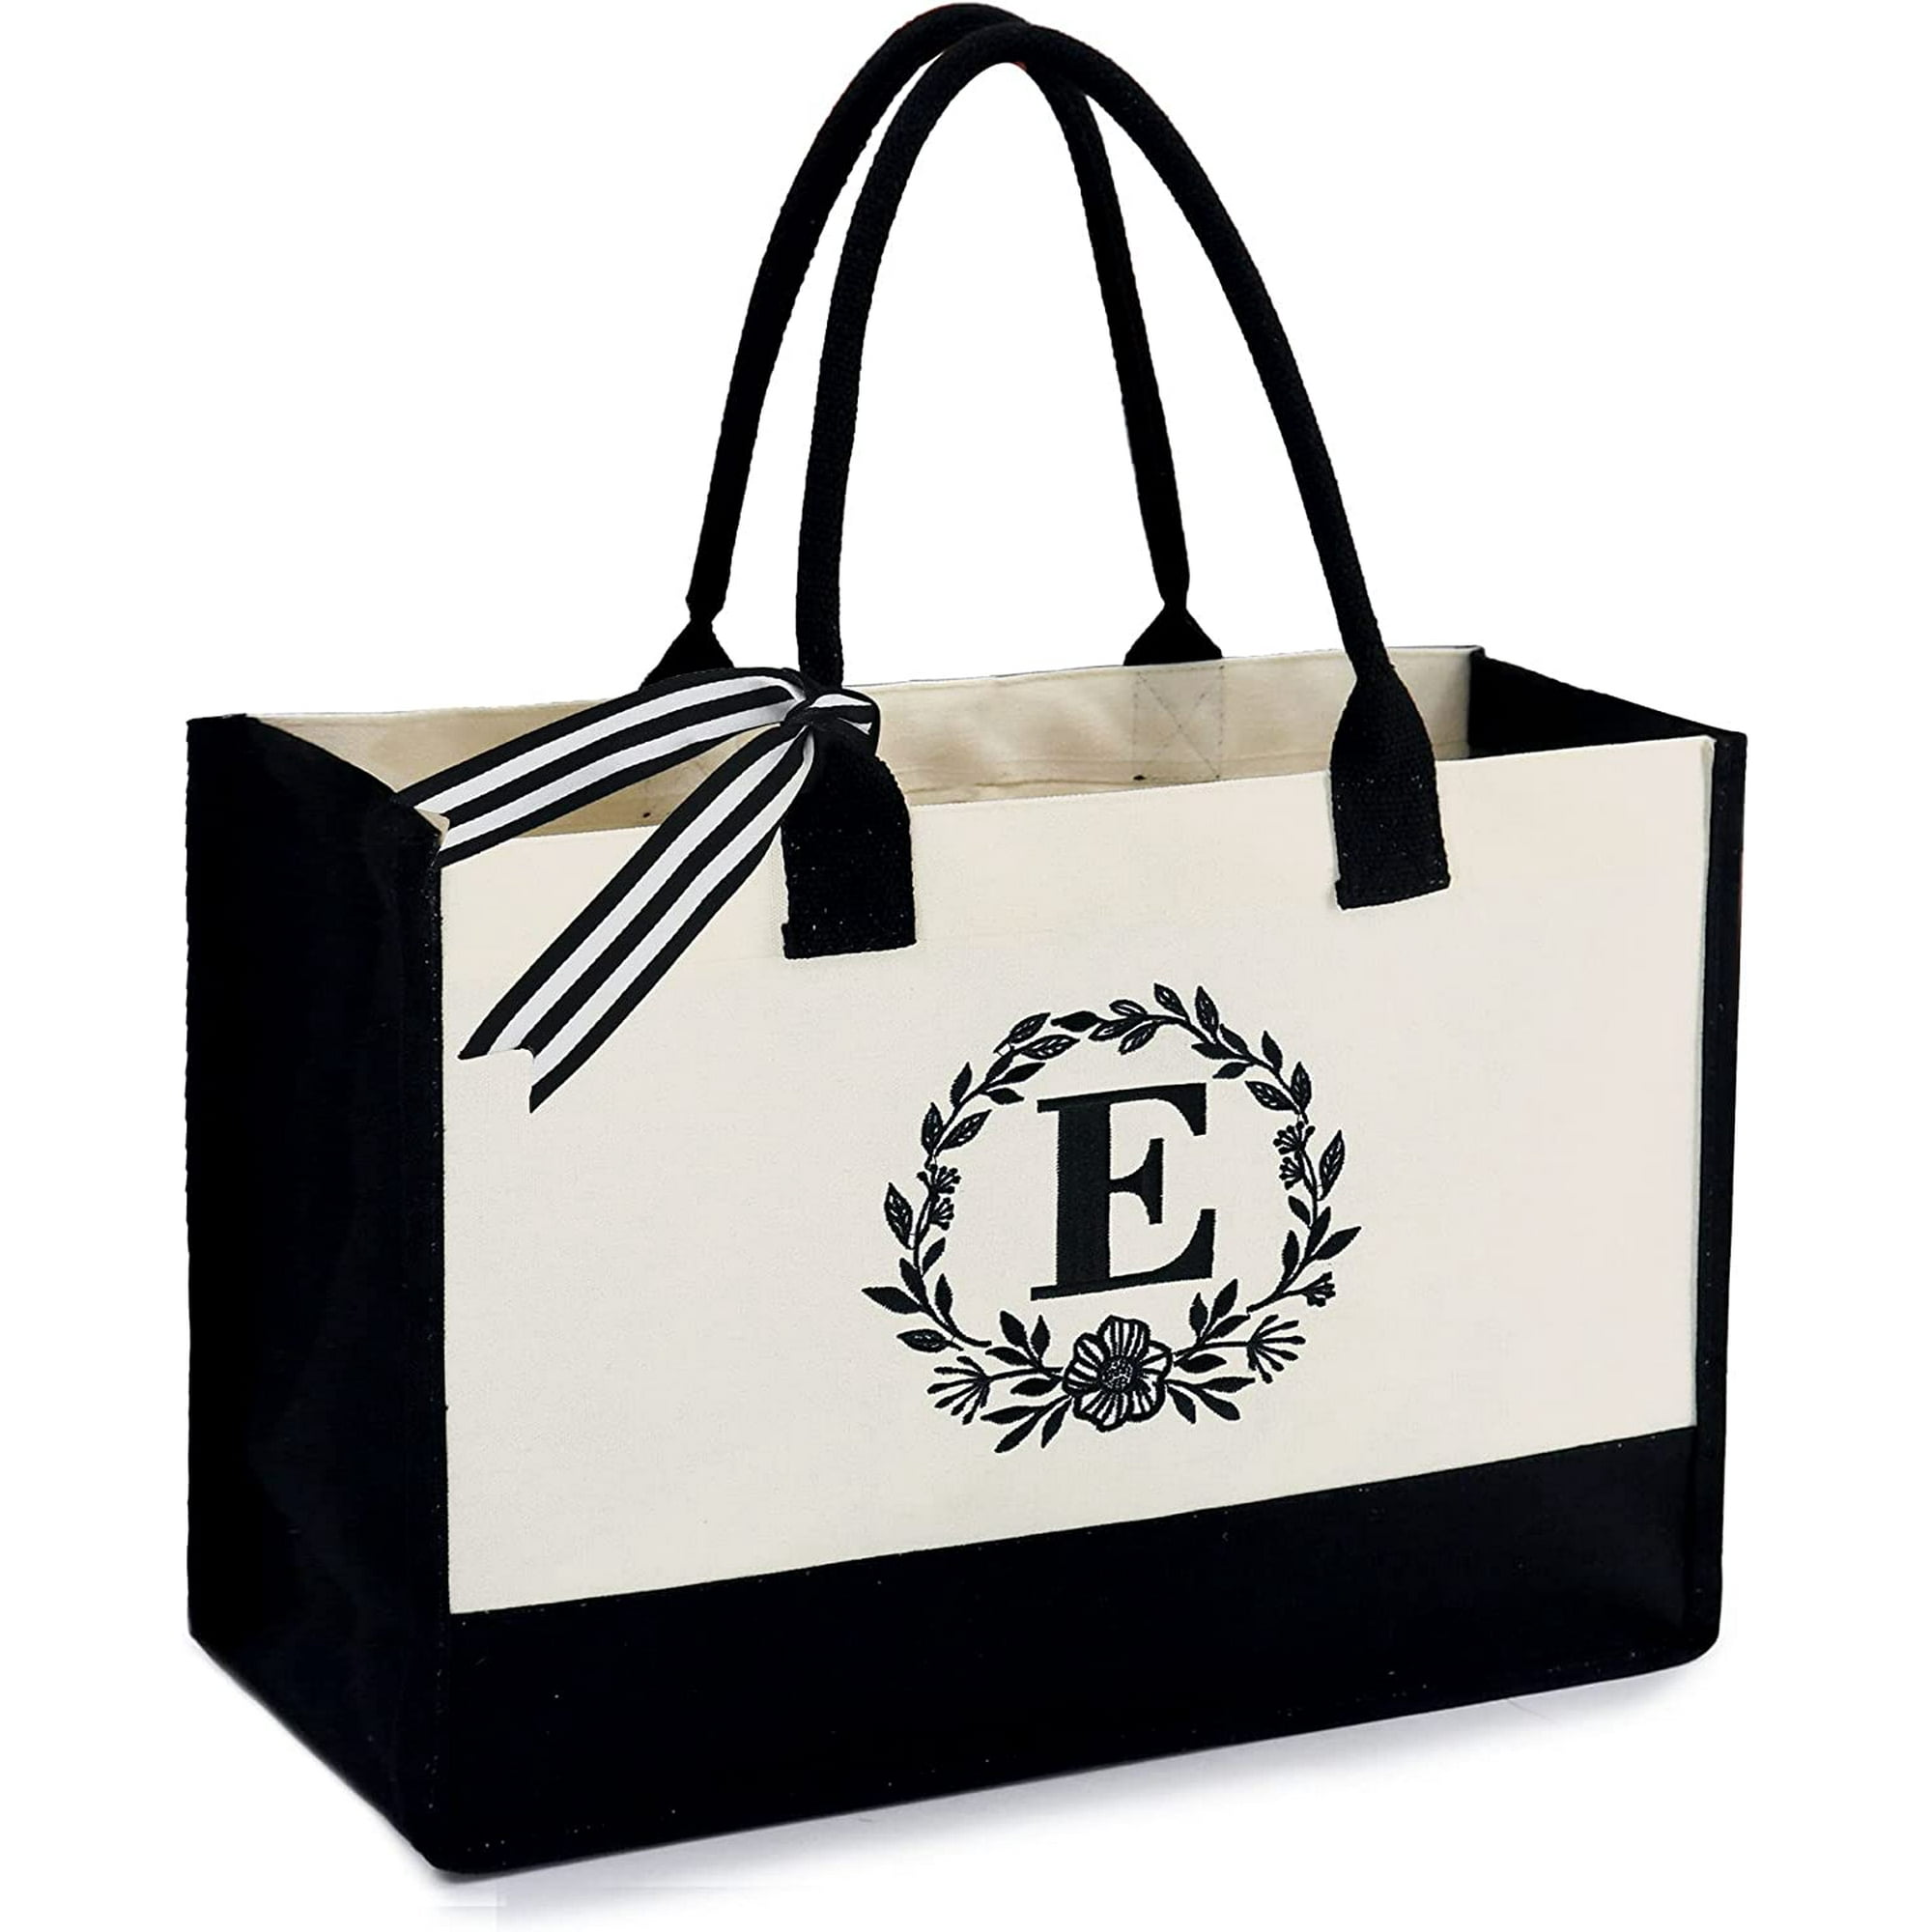 Monogrammed + Personalized Bags, Accessories + Gifts